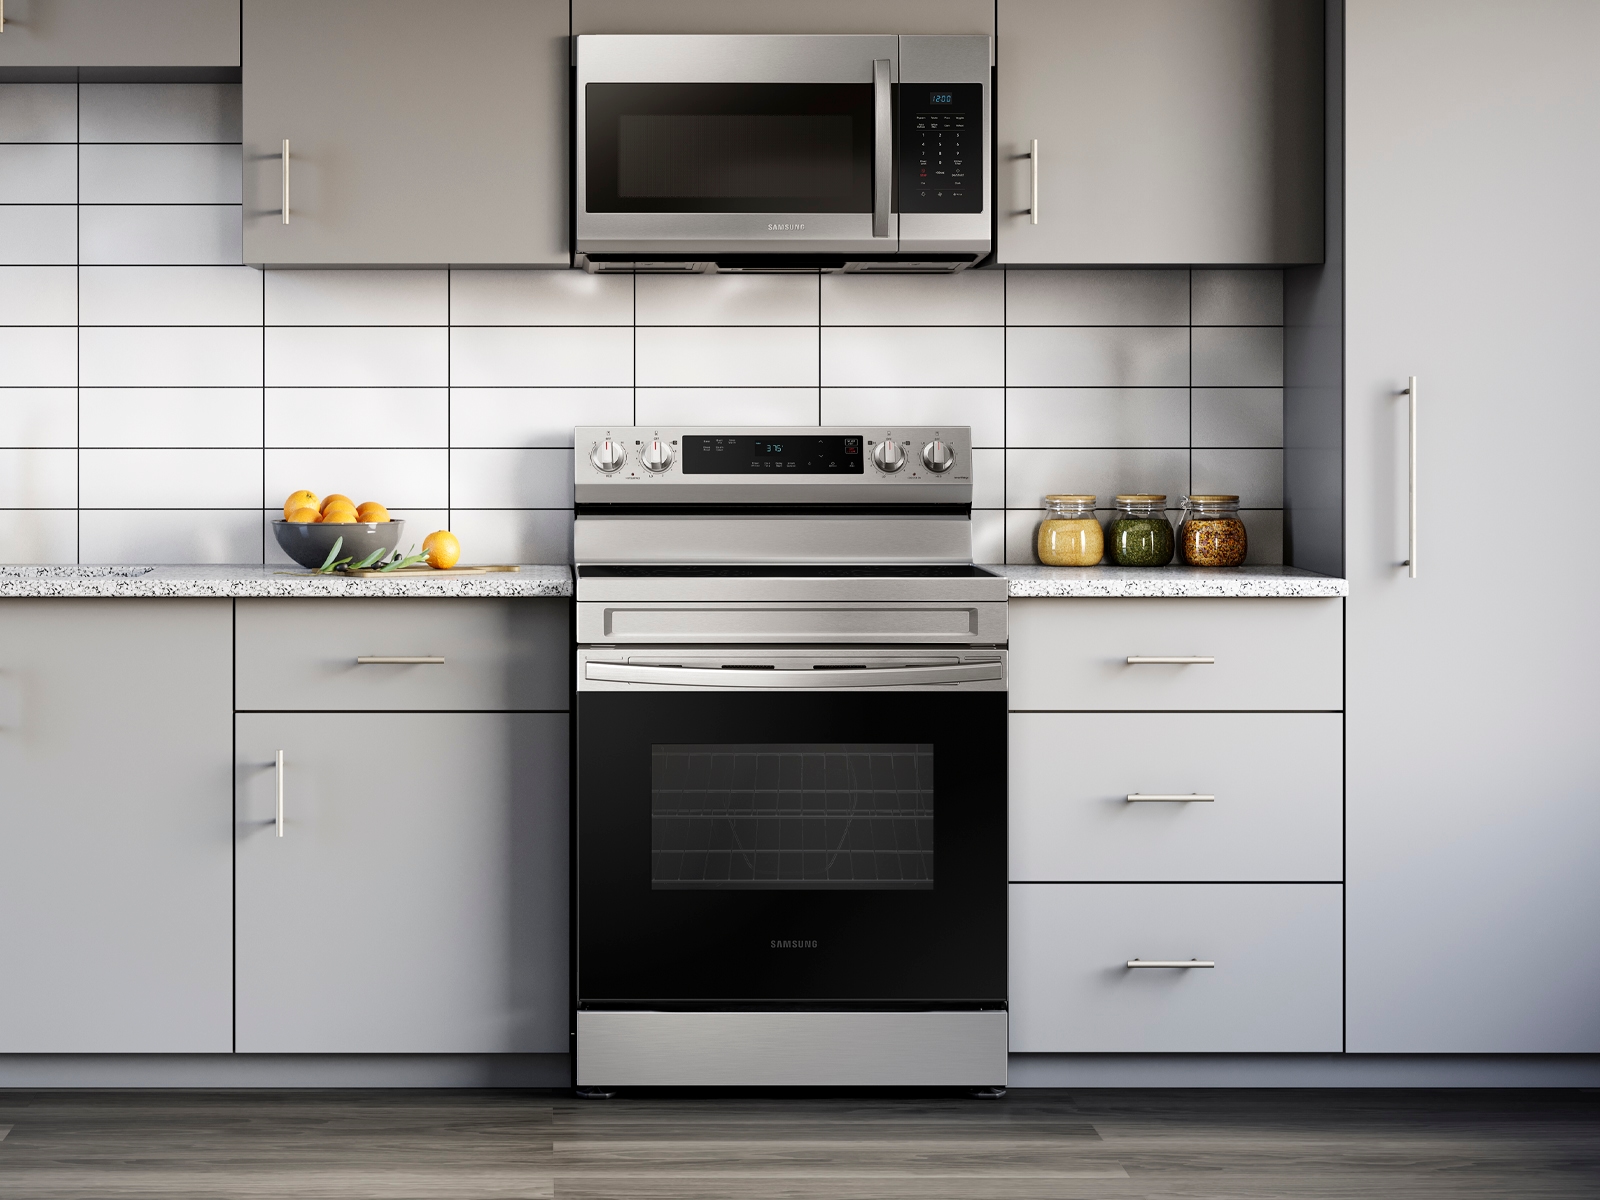 Thumbnail image of 6.3 cu. ft. Smart Freestanding Electric Range with Steam Clean in Stainless Steel